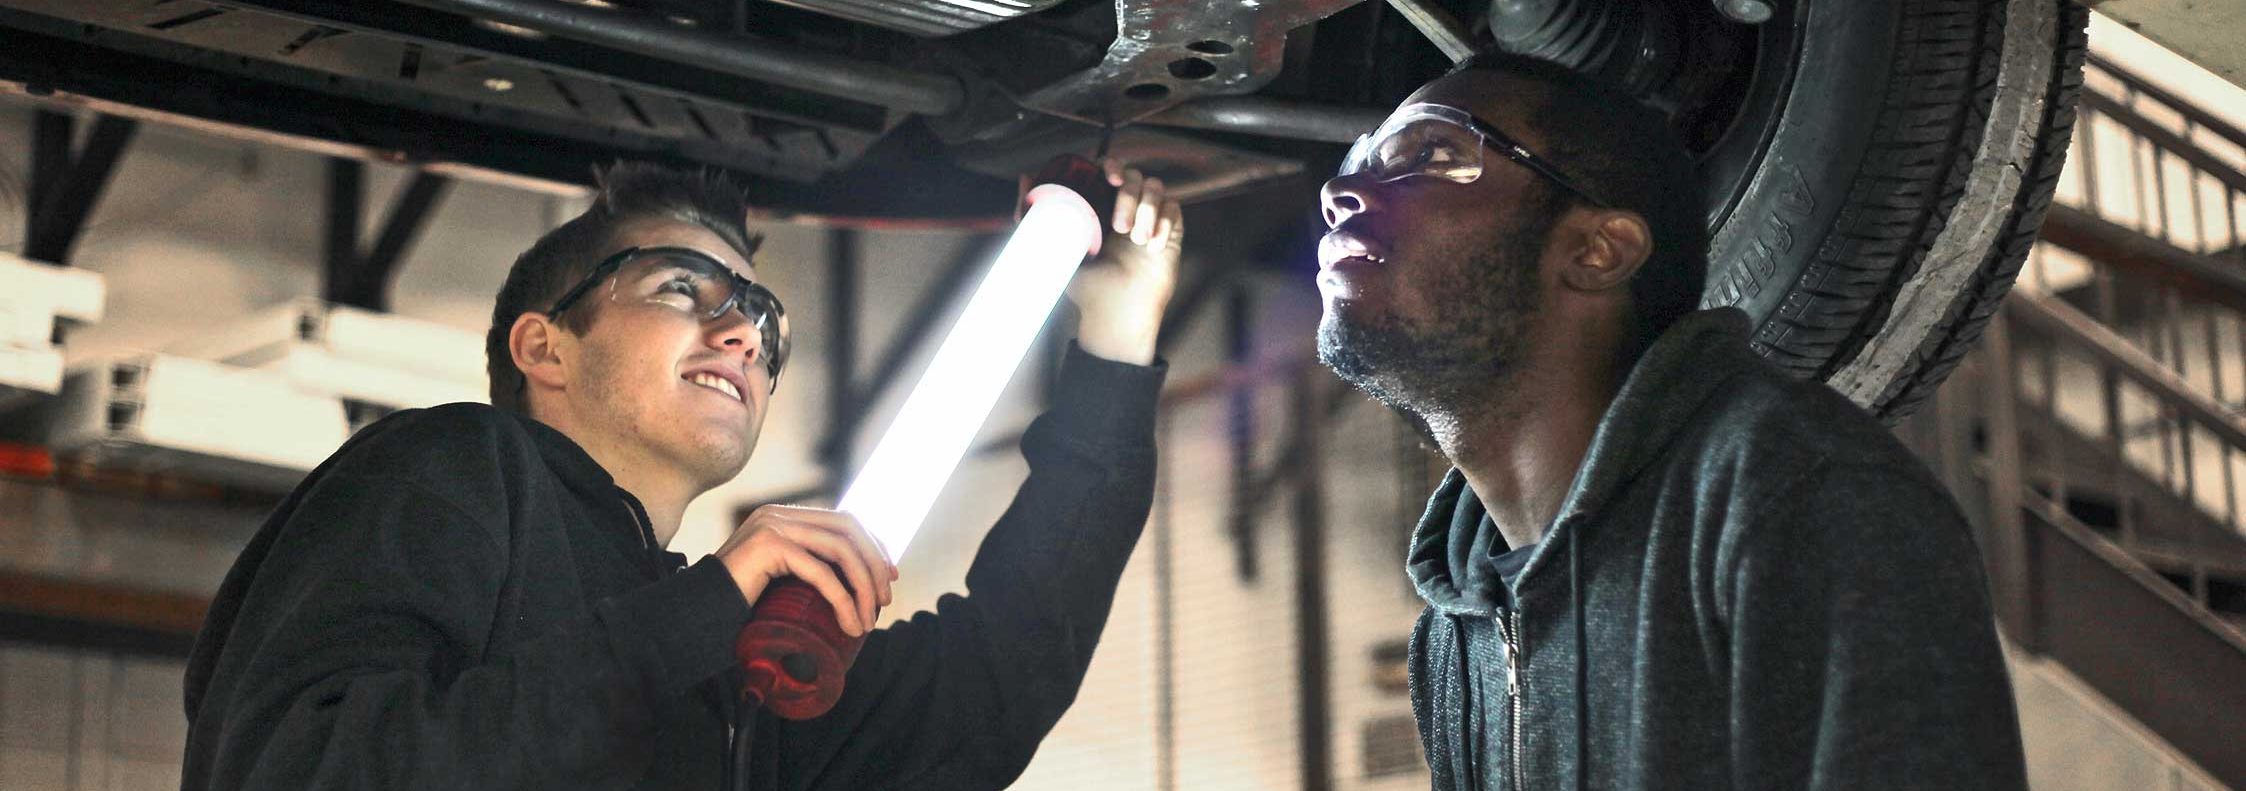 two students working under a car